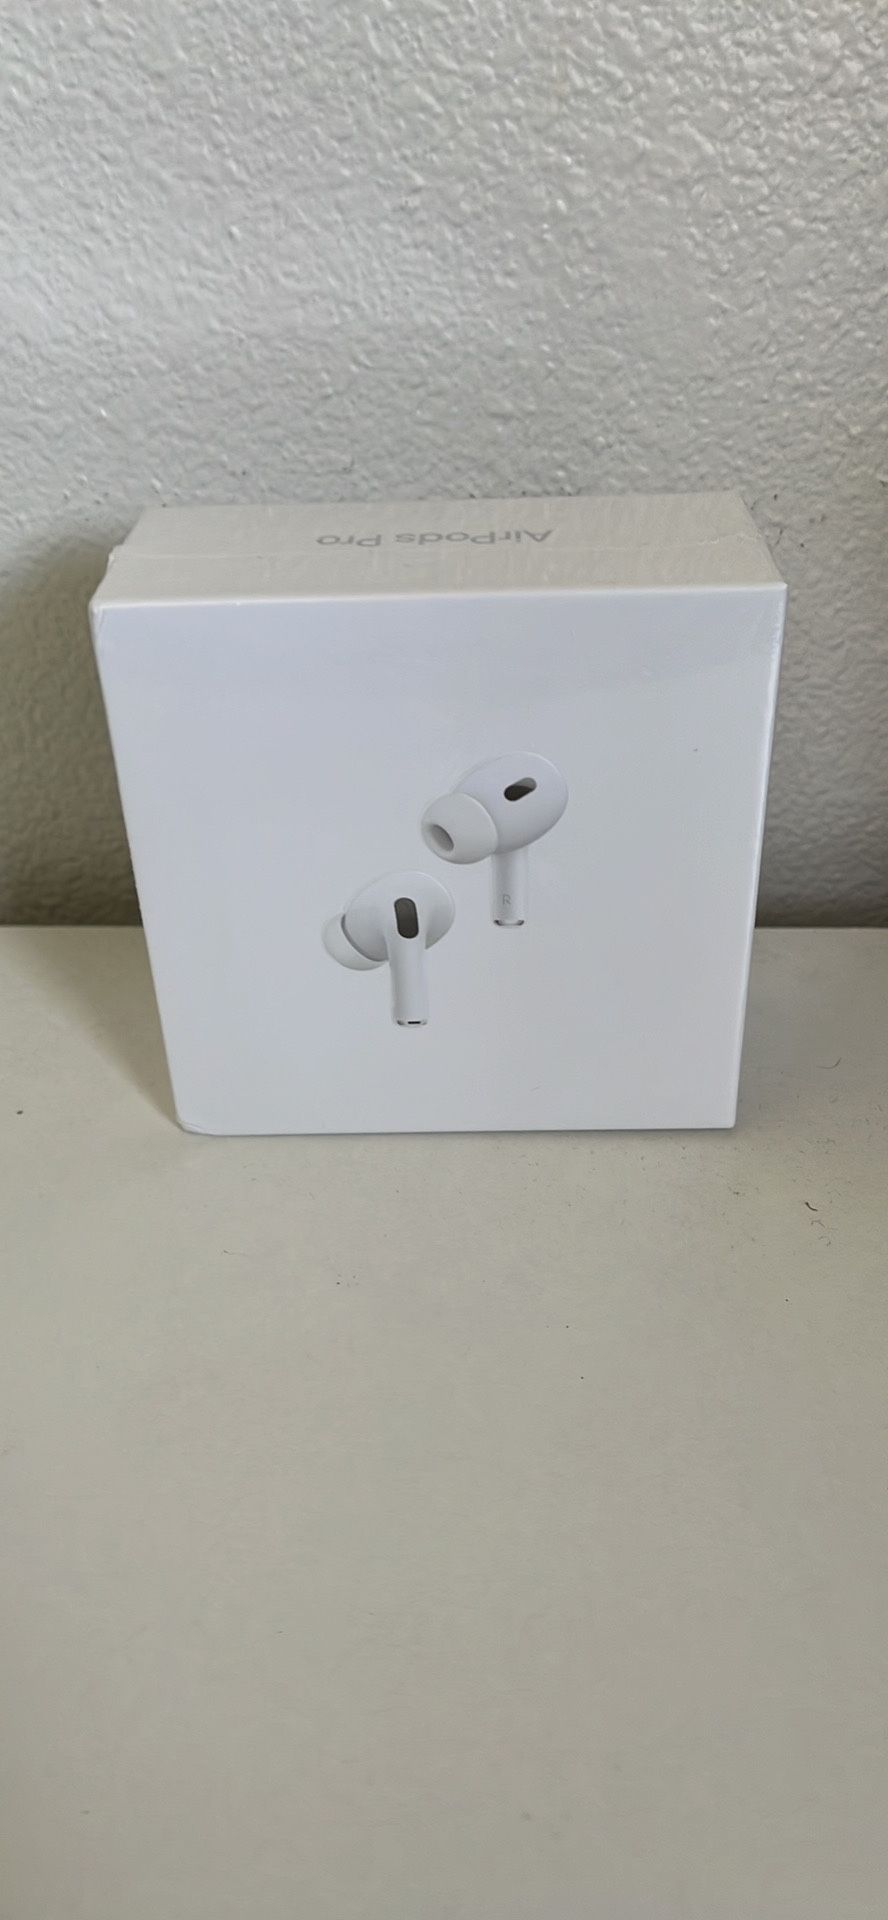 Airpods pro’s generation 2 